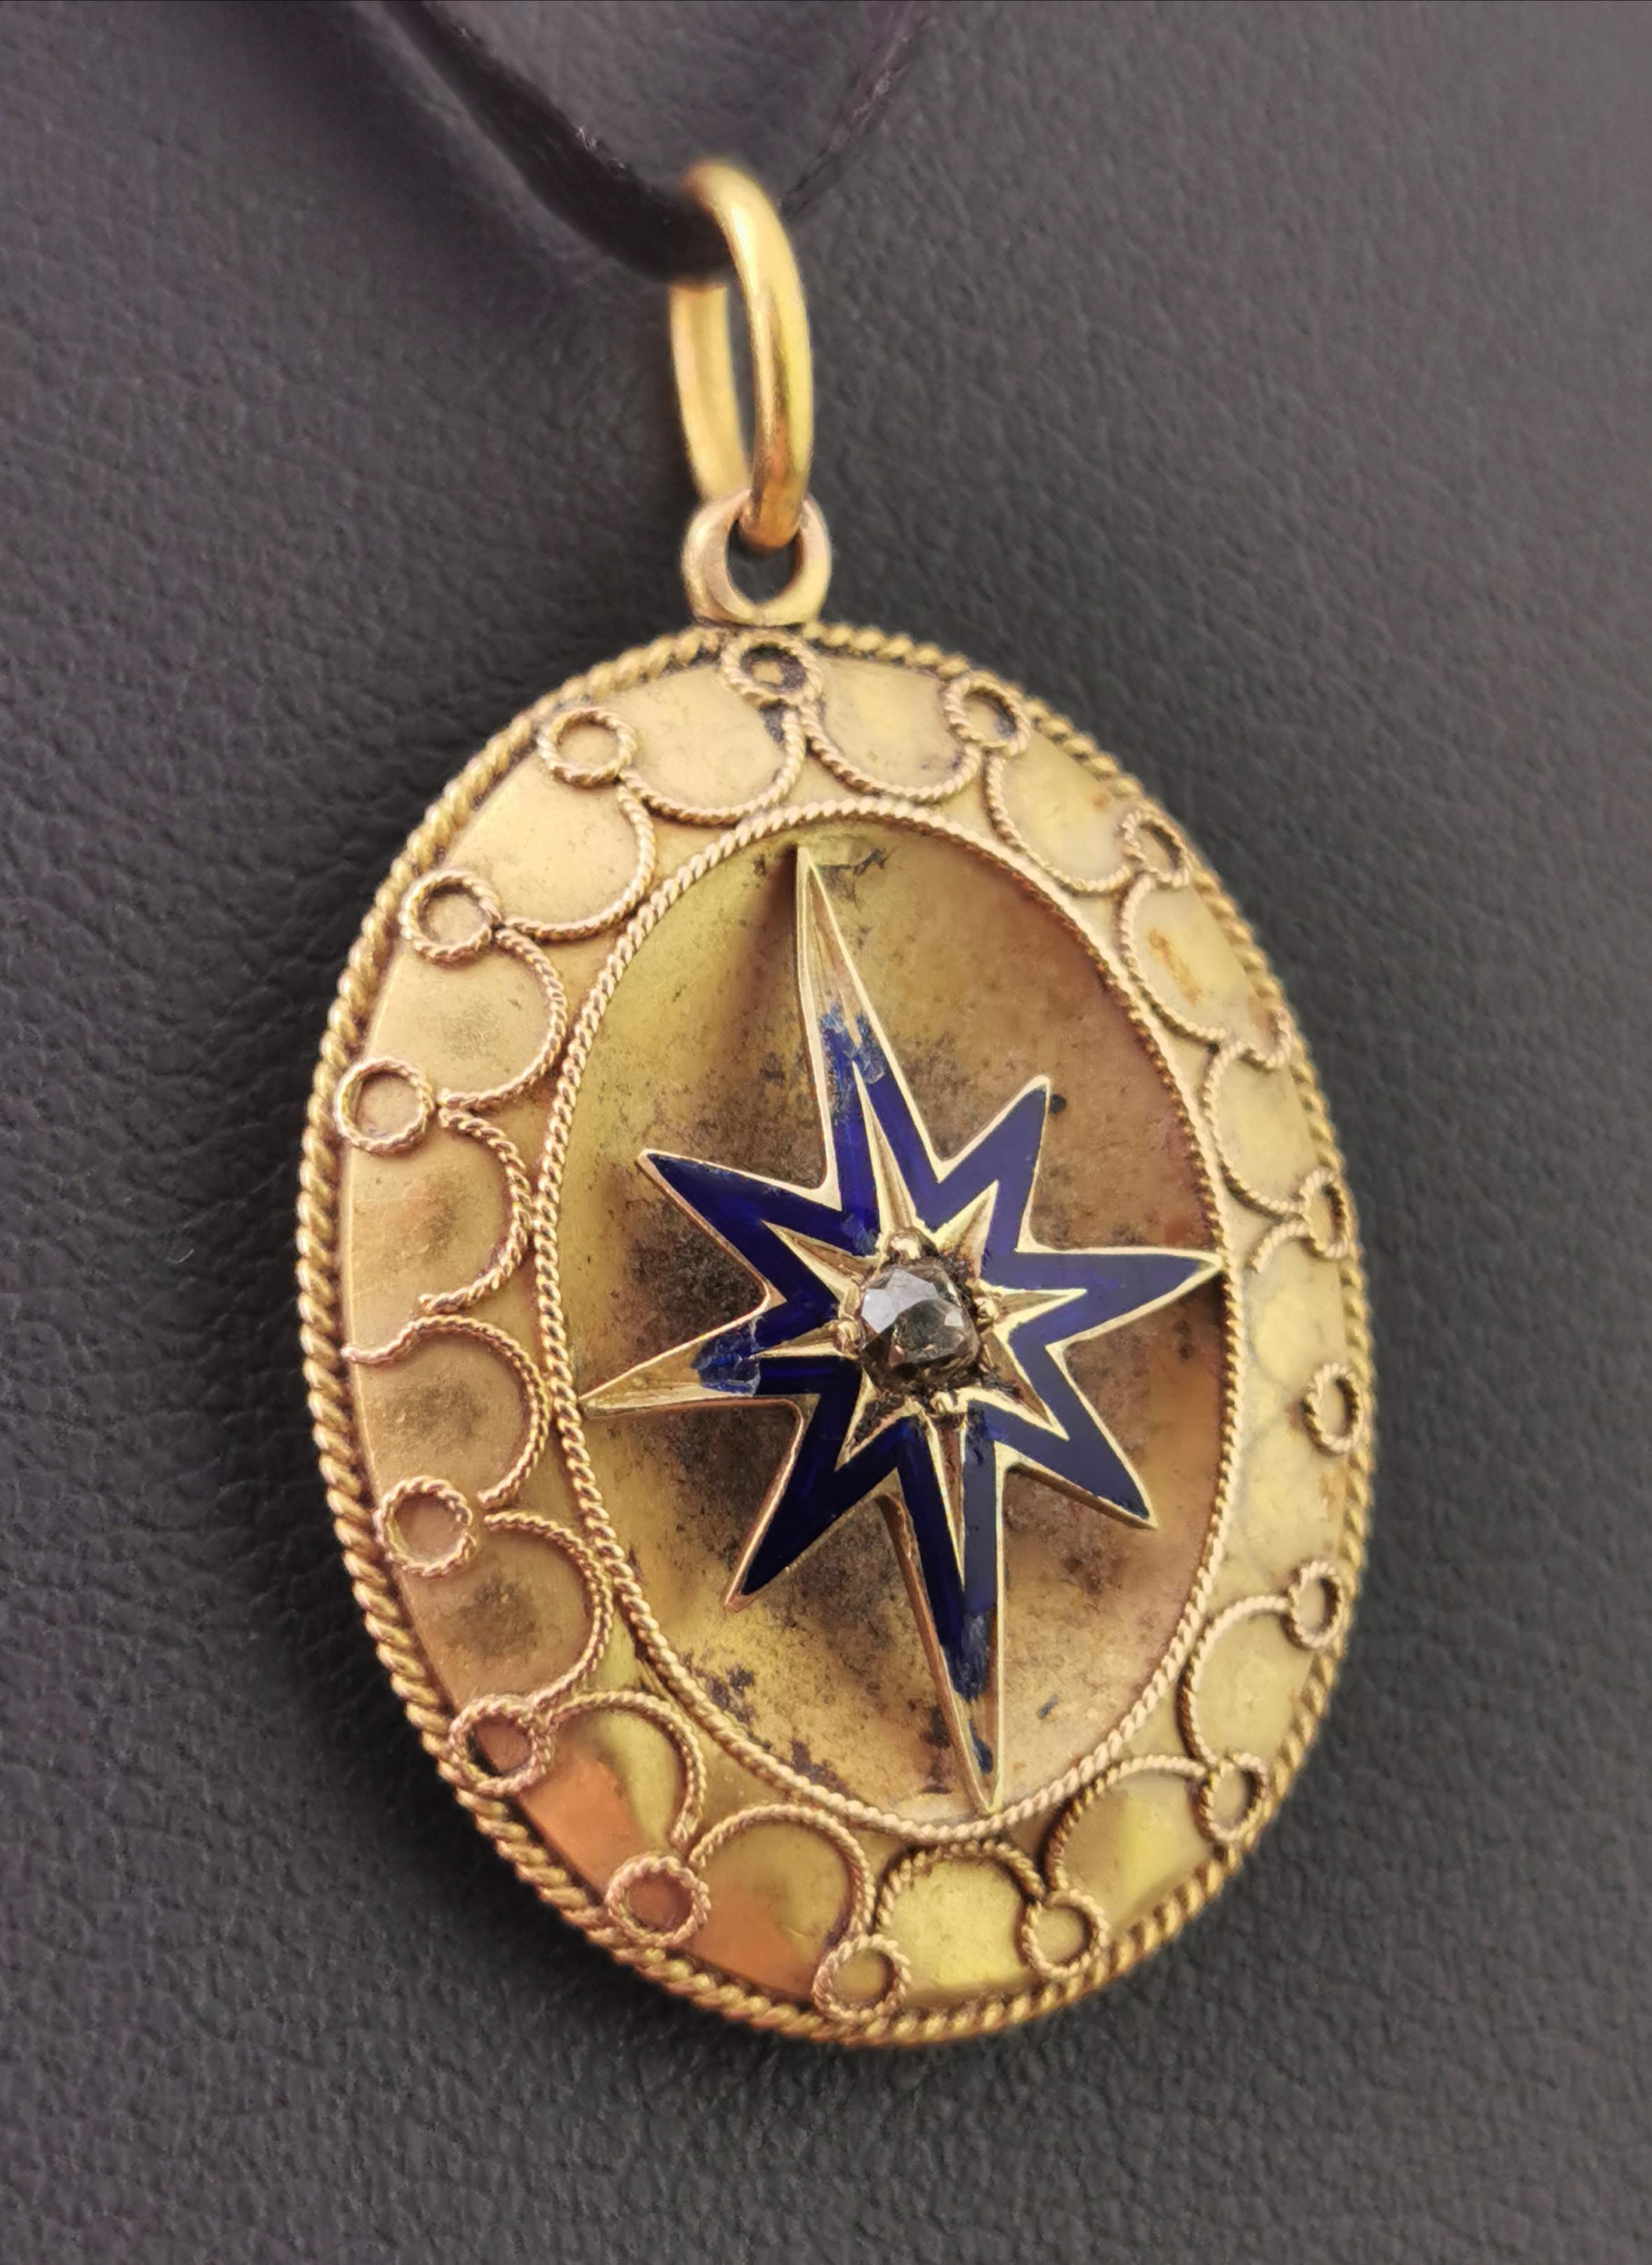 A beautiful antique Victorian 9 karat yellow gold and blue enamel star pendant.

Made from bloomed 9 karat gold it has the rich appearance of high carat gold, it has a cobalt blue enamel star to the centre gypsy set with a single old rose cut